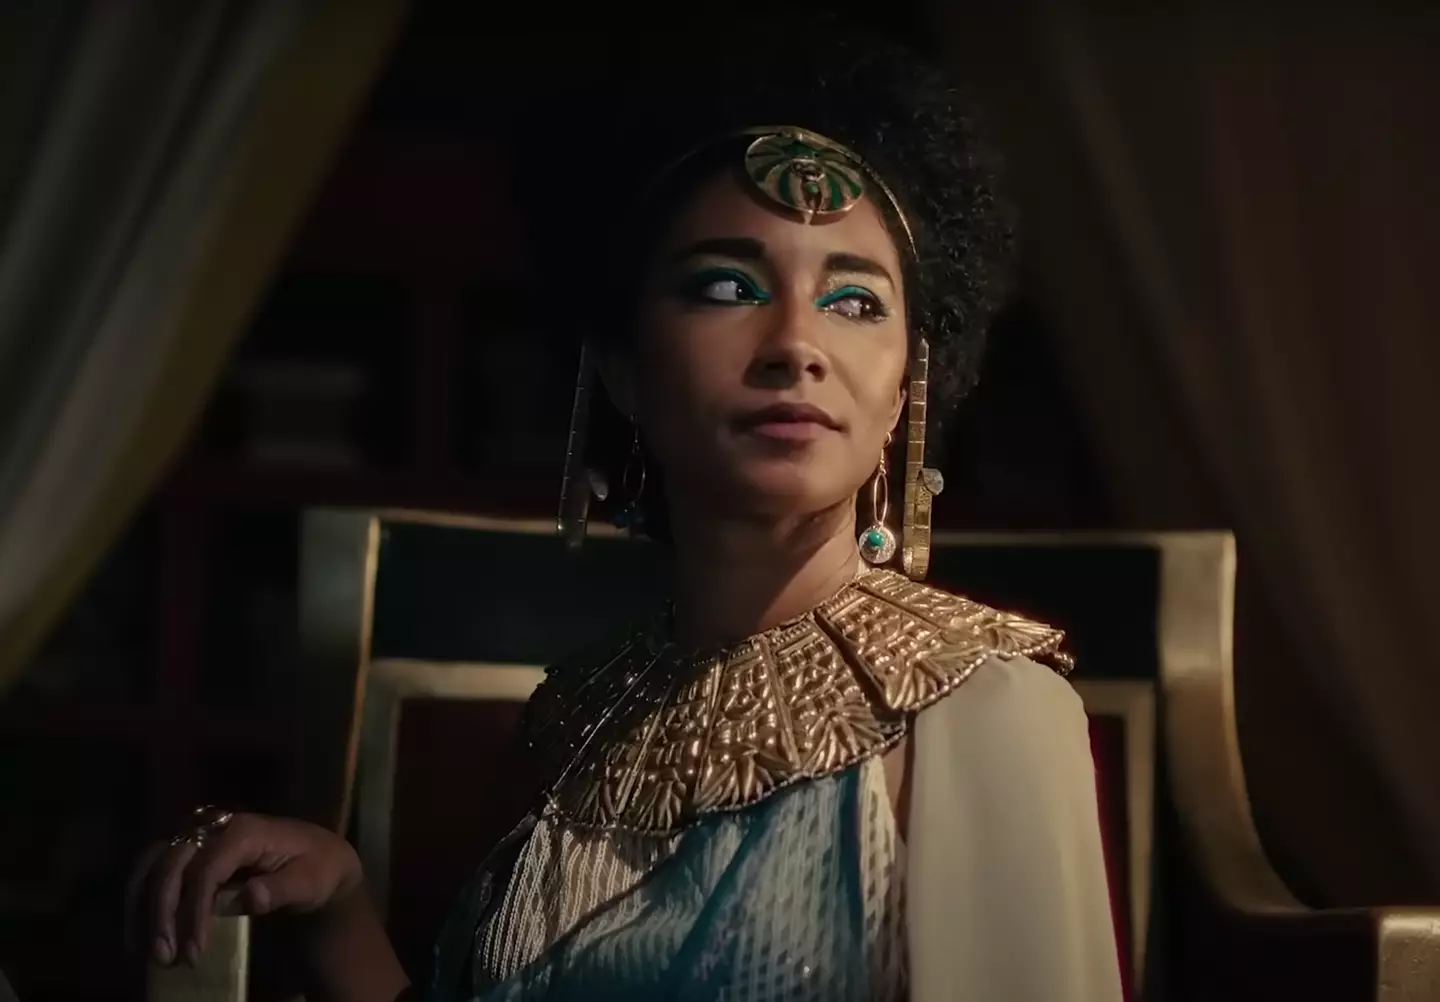 "This season will feature Cleopatra, the world’s most famous, powerful, and misunderstood woman."